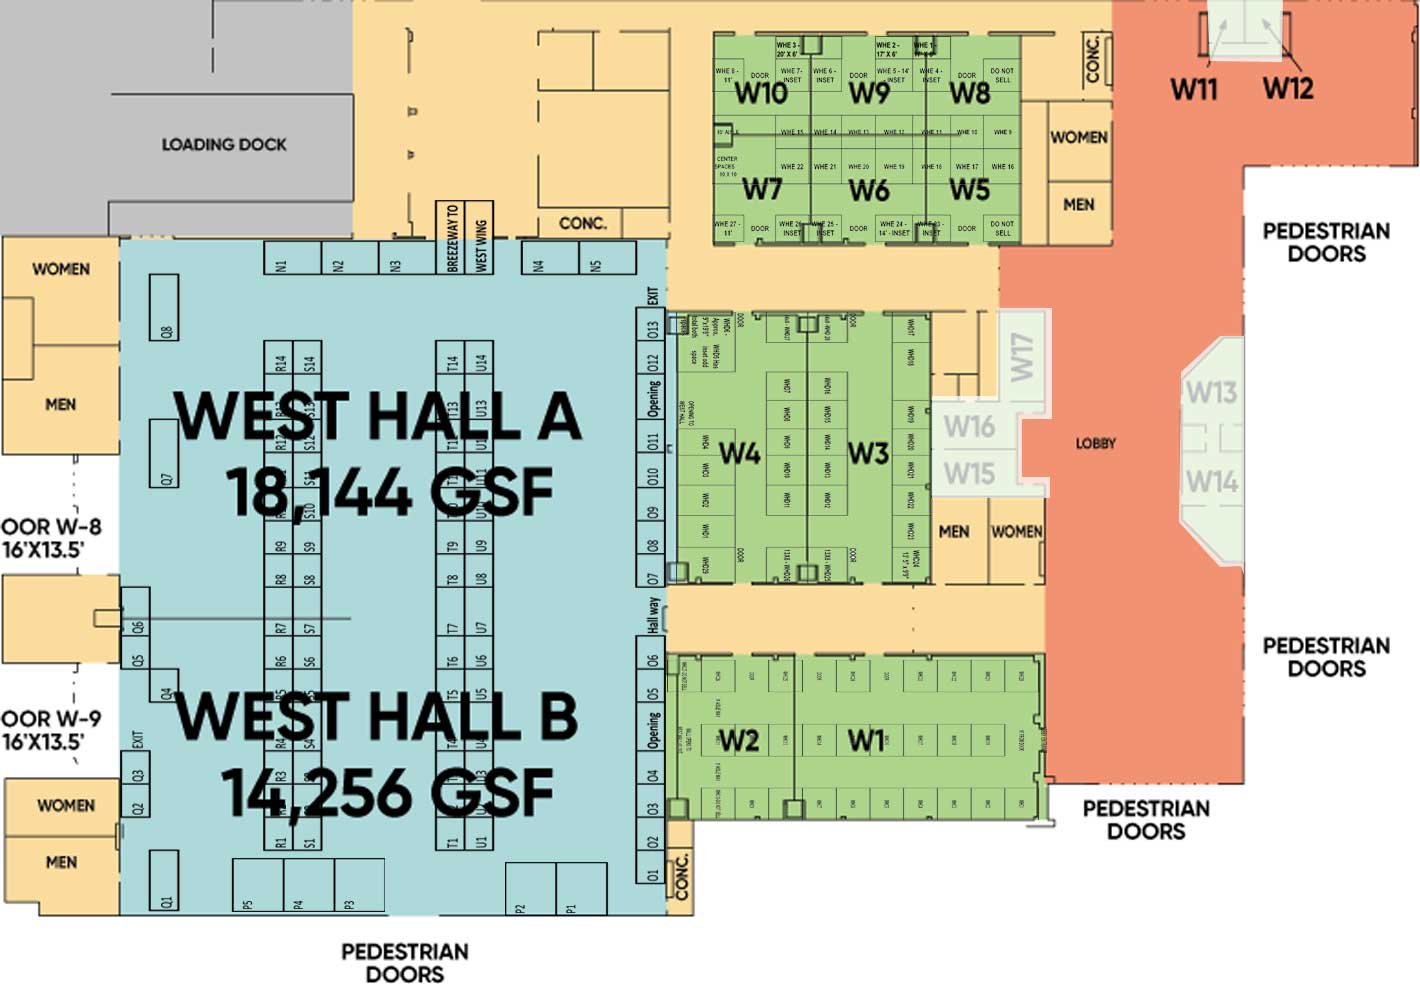 Map of Kentucky Expo Center West Hall